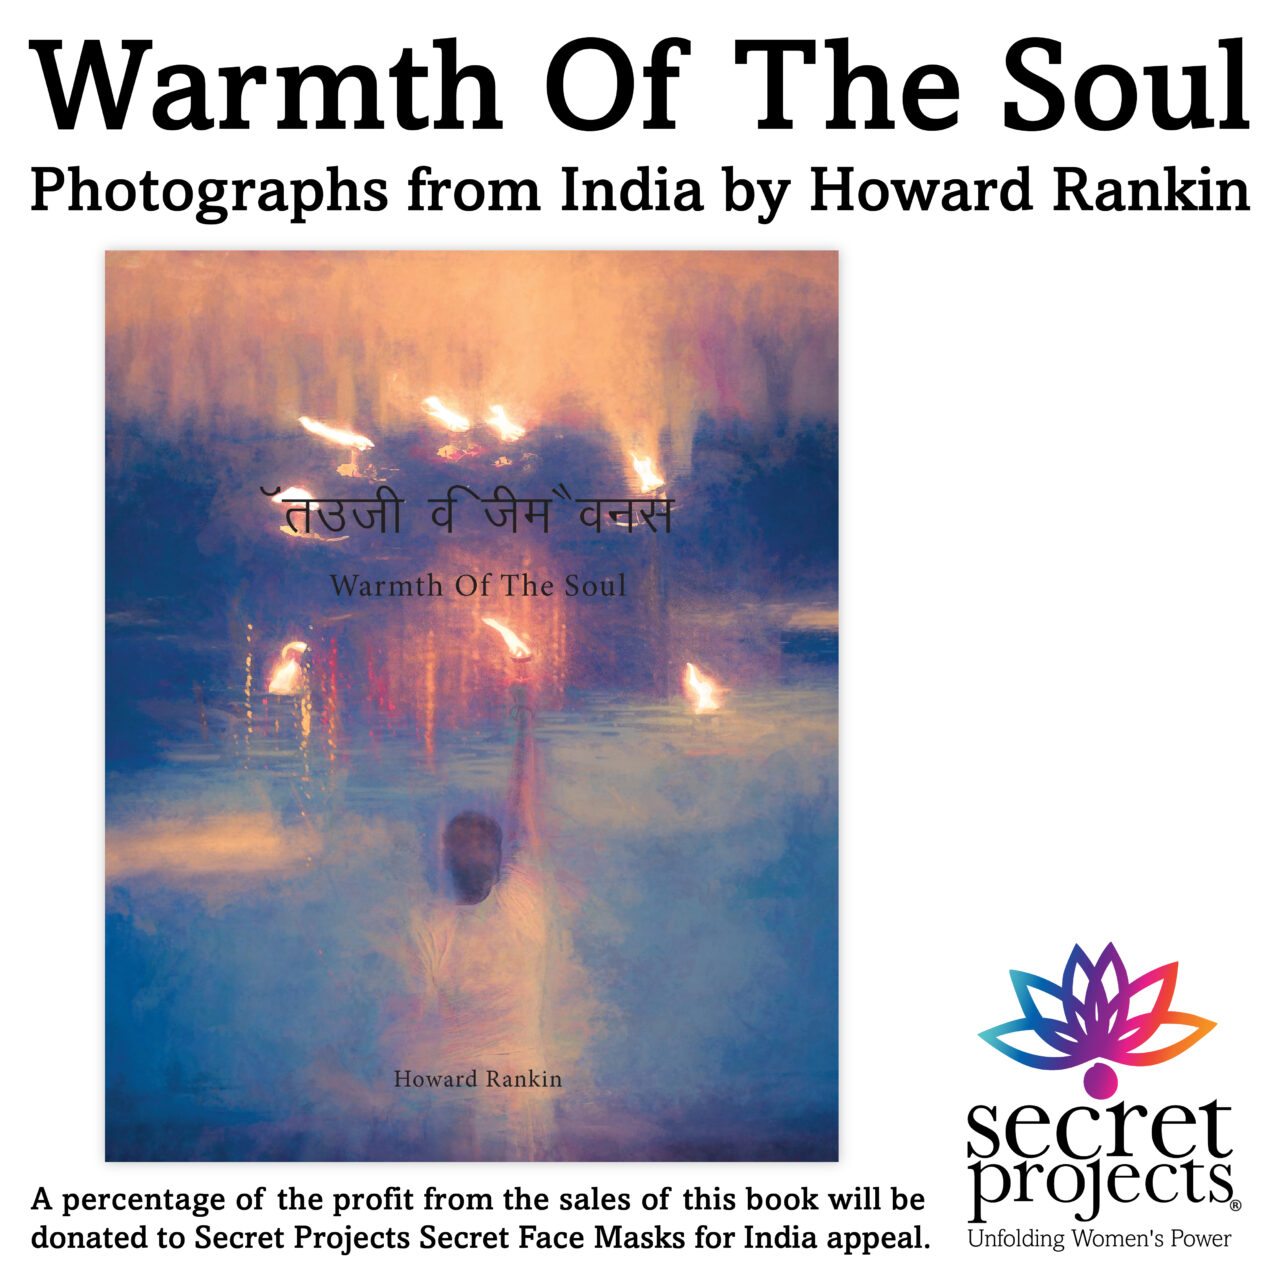 Warmth Of The Soul - a photographic reflection of a deep love for India by Howard Rankin. Profits from the sale of the book will be given to SP!